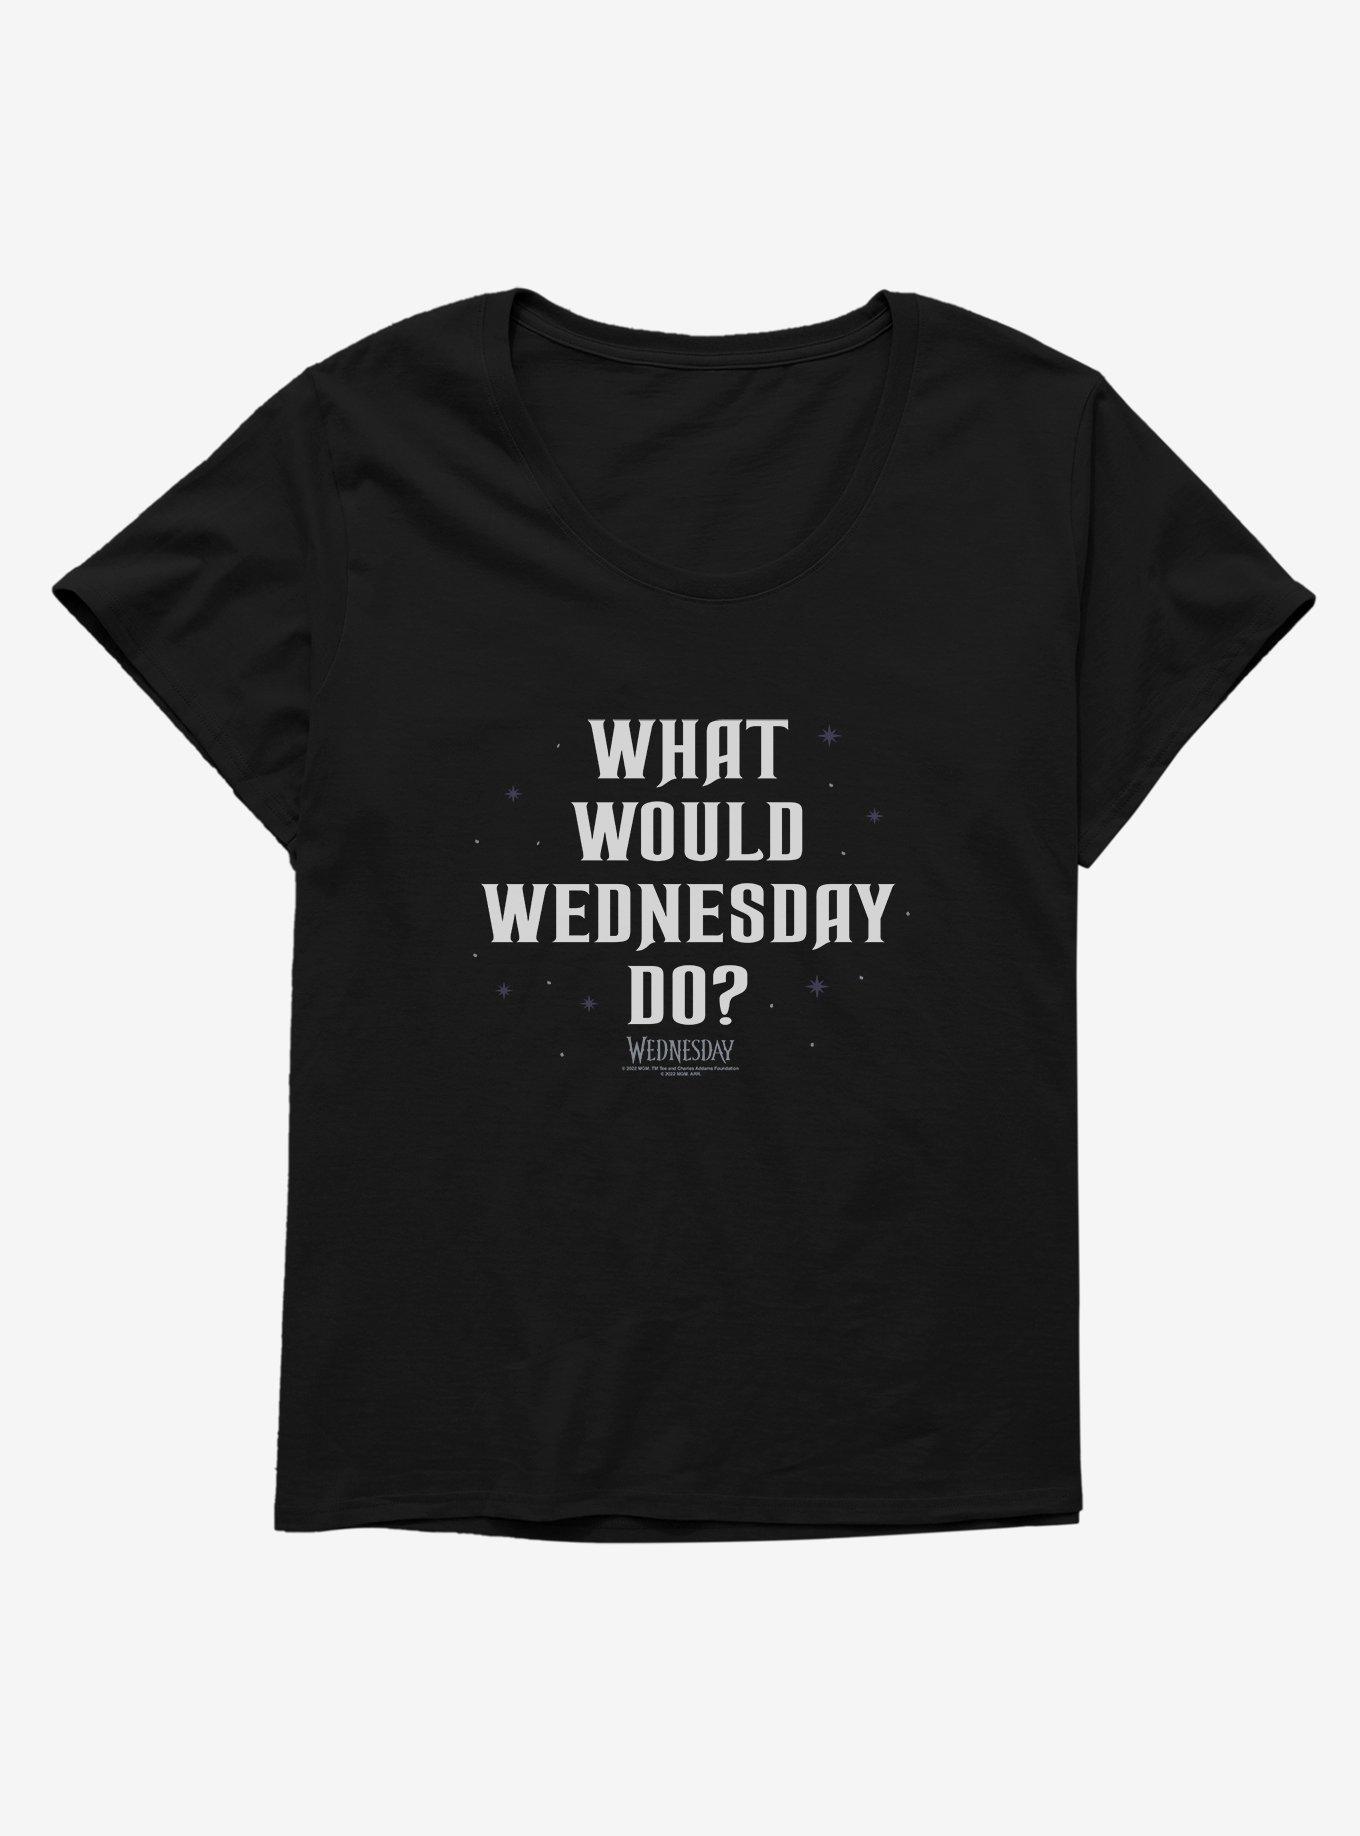 Wednesday What Would Do? Girls T-Shirt Plus